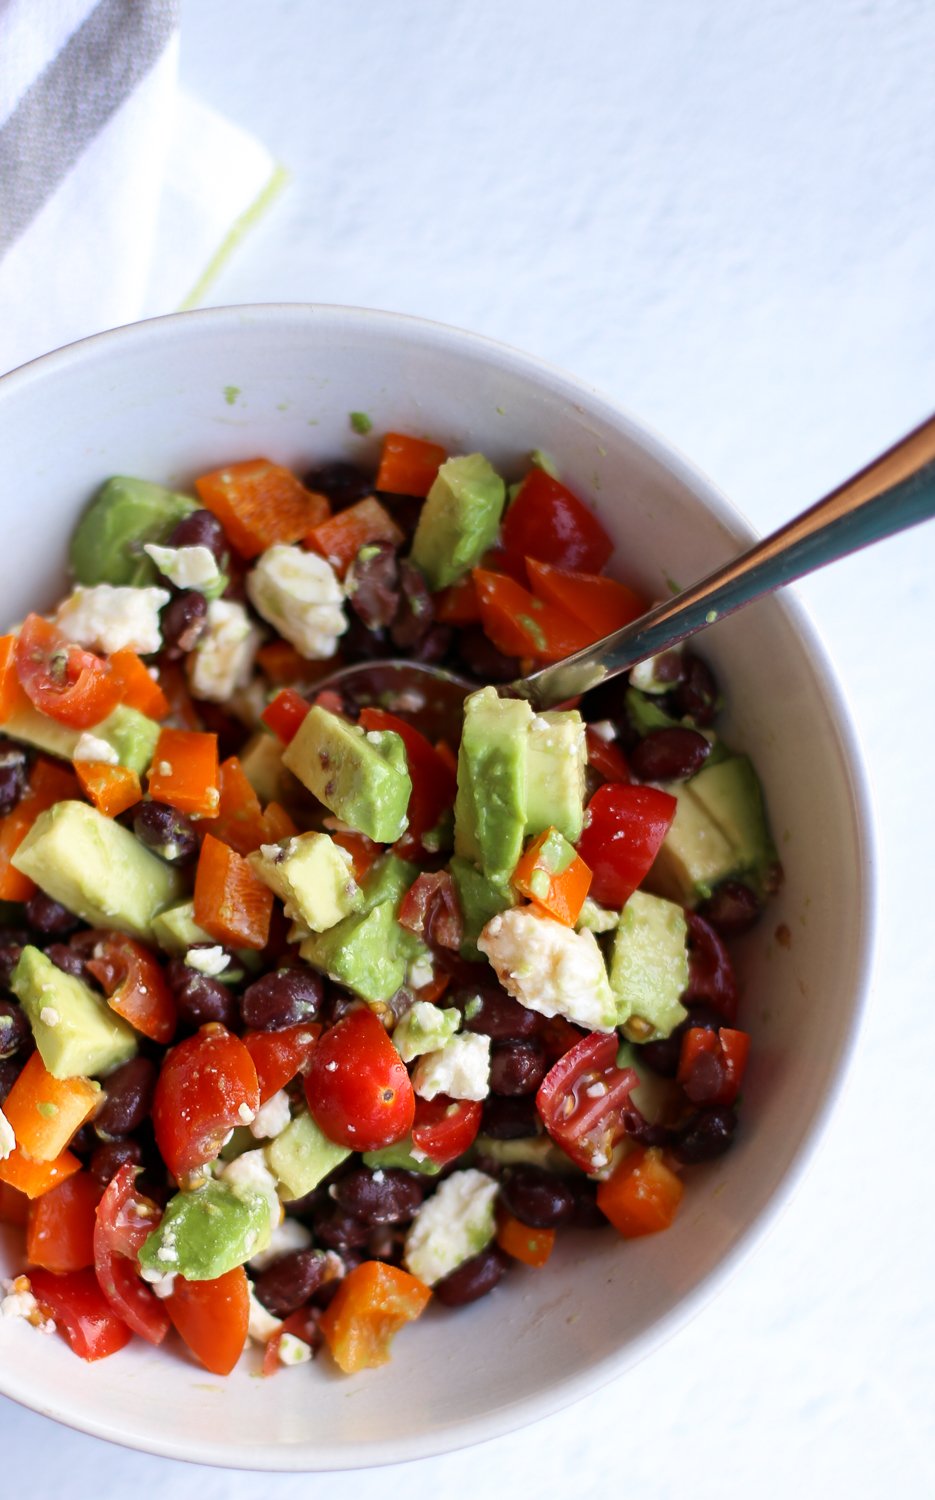 15-Minute High-Protein Lunch Bowl - Rachael's Good Eats